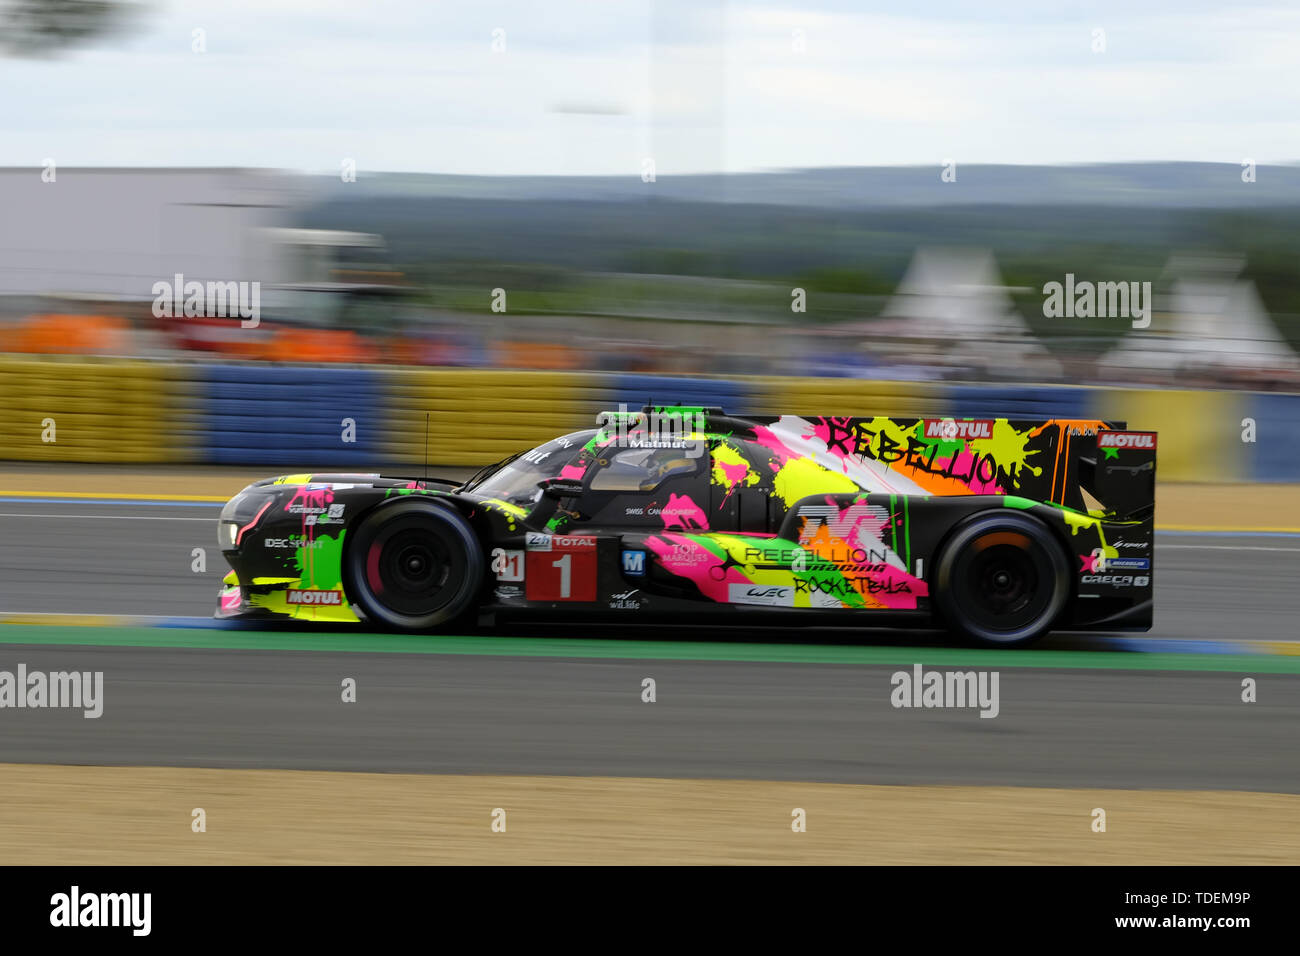 Le Mans, Sarthe, France. 15th June, 2019. Rebellion Racing Rebellion R13 Gibson rider BRUNO SENNA (BRA) in action during the 87th edition of the 24 hours of Le Mans the last round of the FIA World Endurance Championship at the Sarthe circuit at Le Mans - France Credit: Pierre Stevenin/ZUMA Wire/Alamy Live News Stock Photo